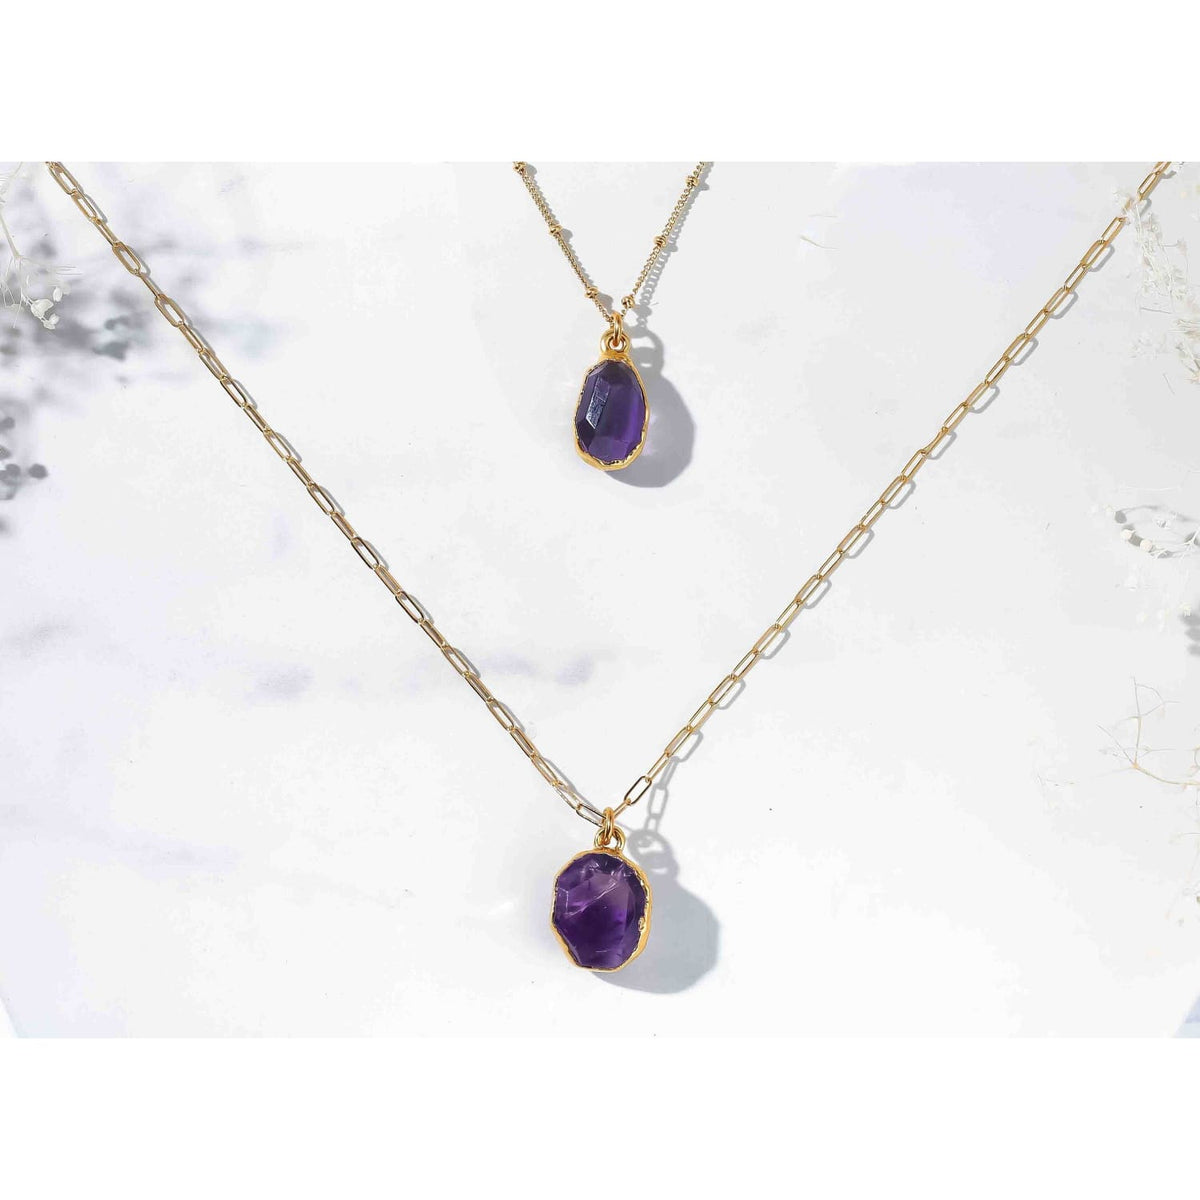 Geo Raw Amethyst Necklace with Paperclip Chain Gemstone